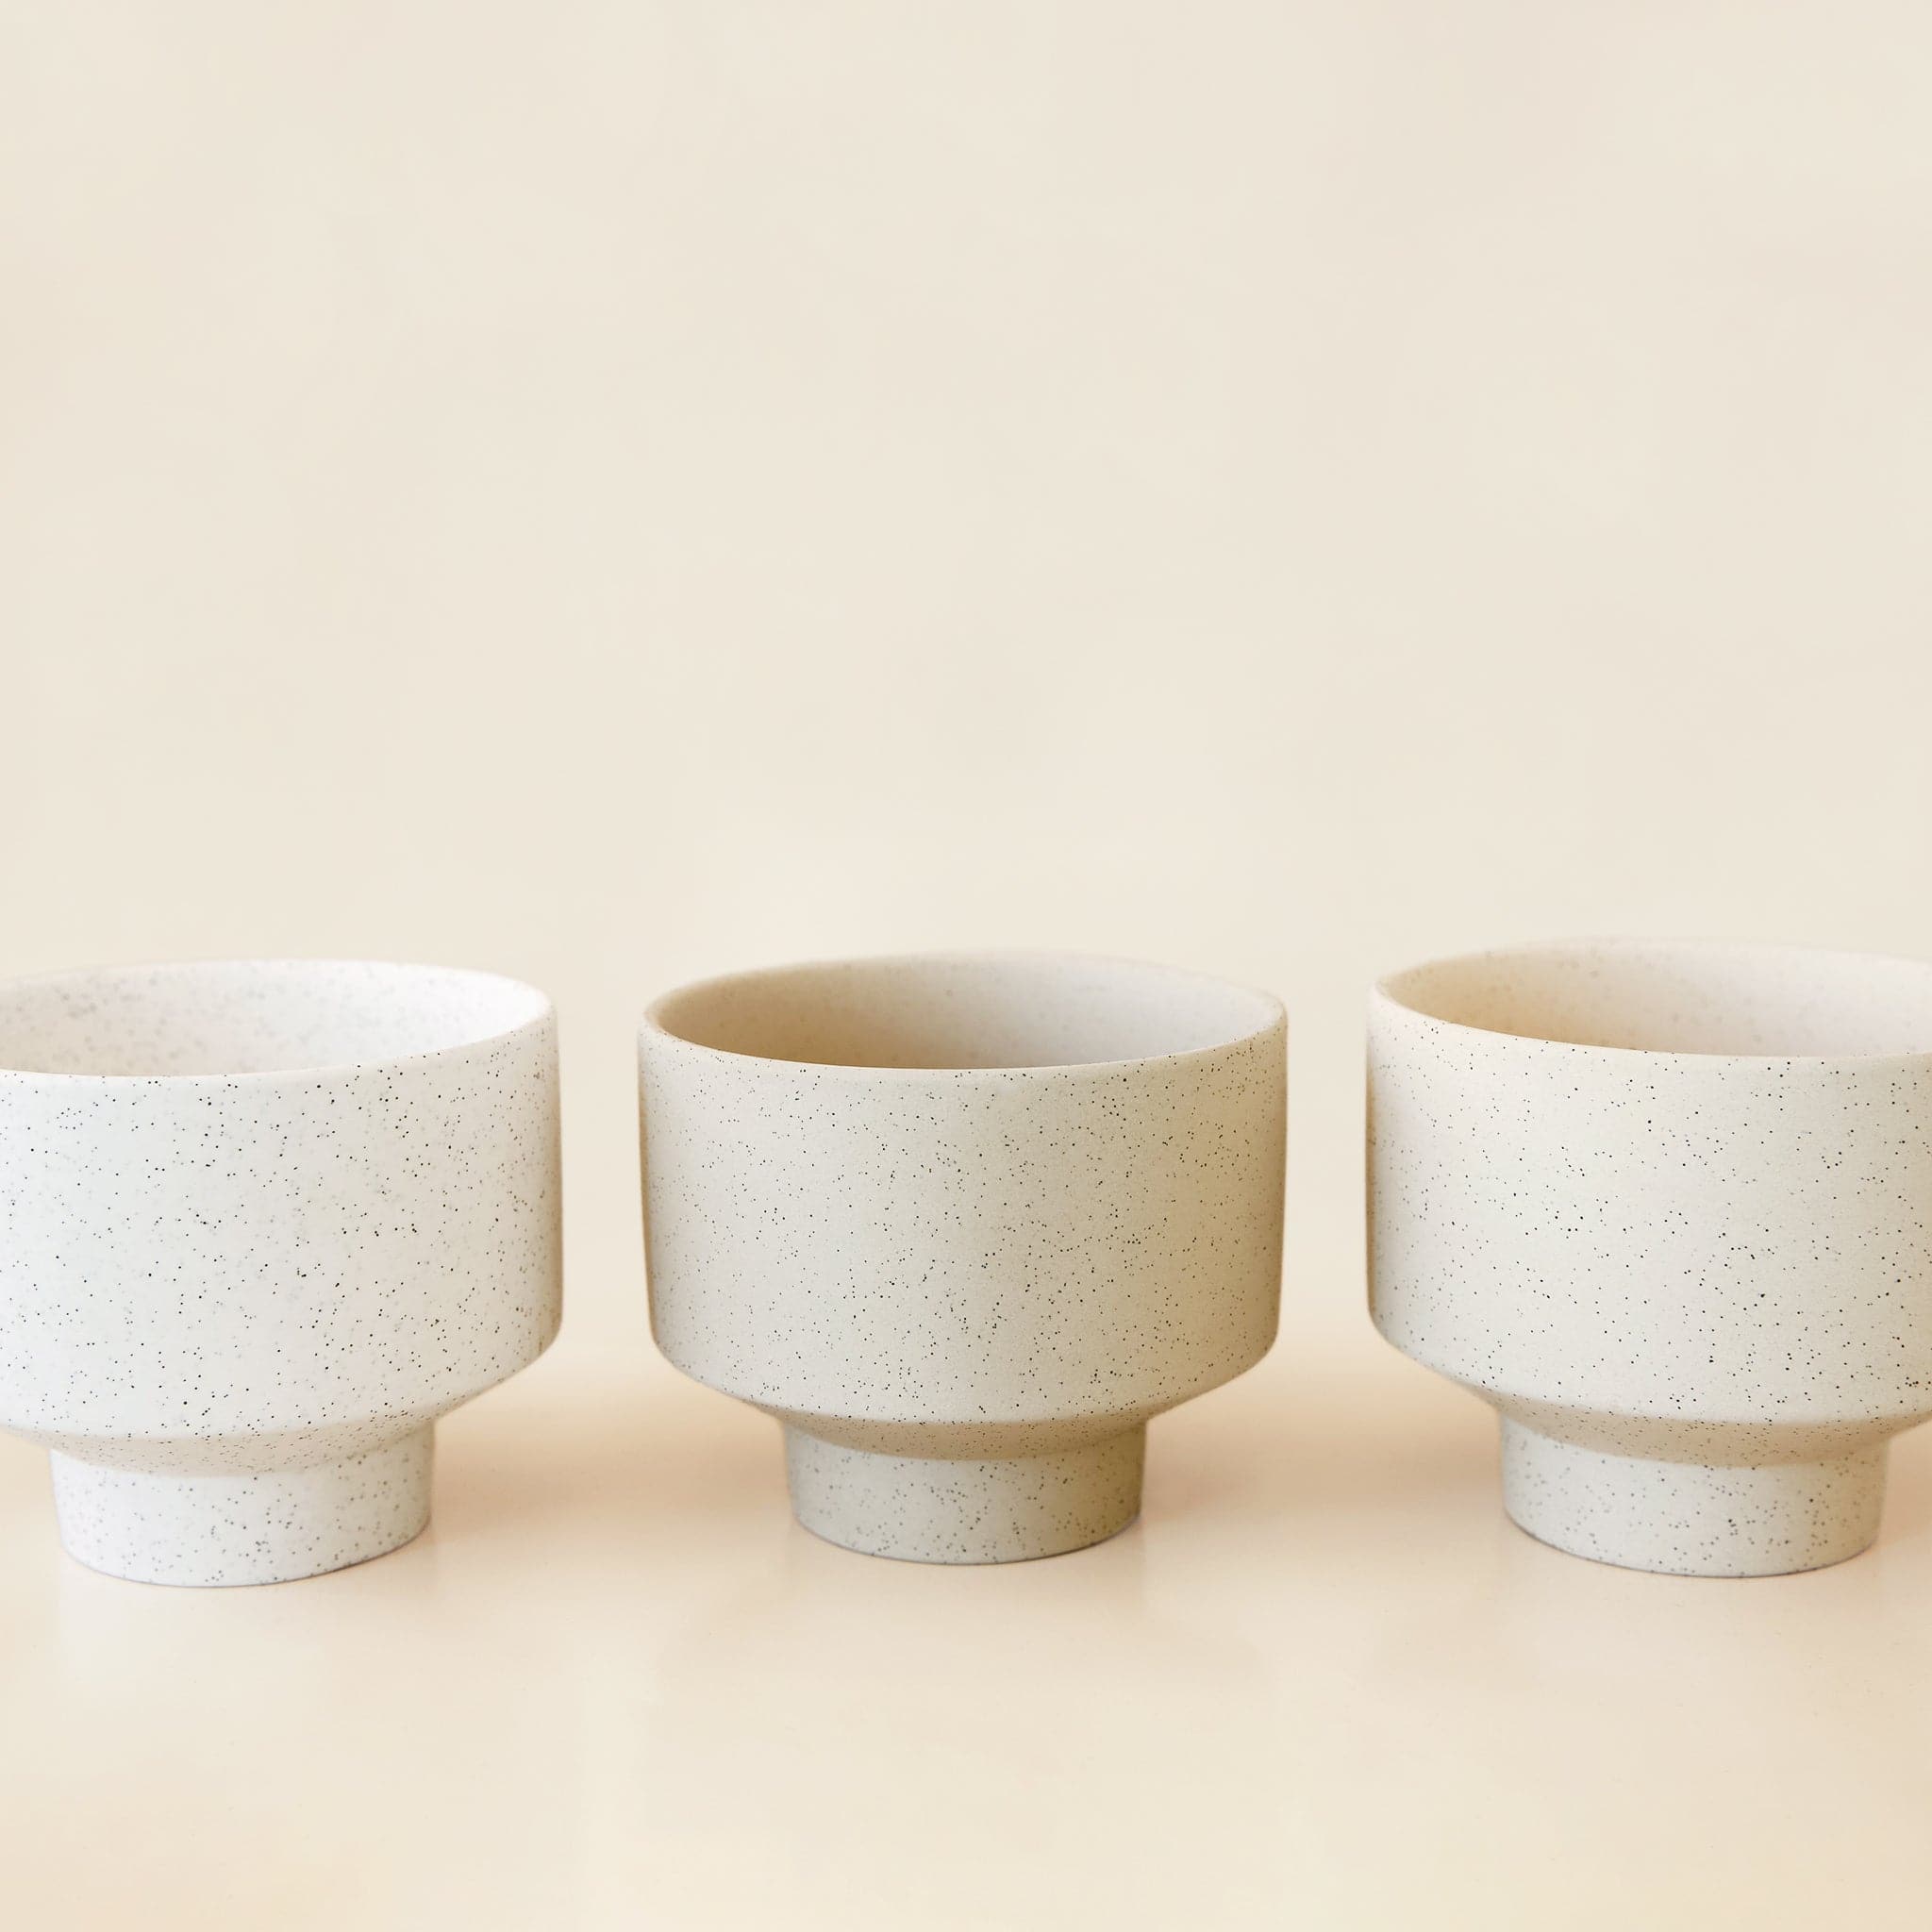 Three round, ceramic white pots with a tapered bottom. The pots have black speckles and are in an array of warm cream tones. 